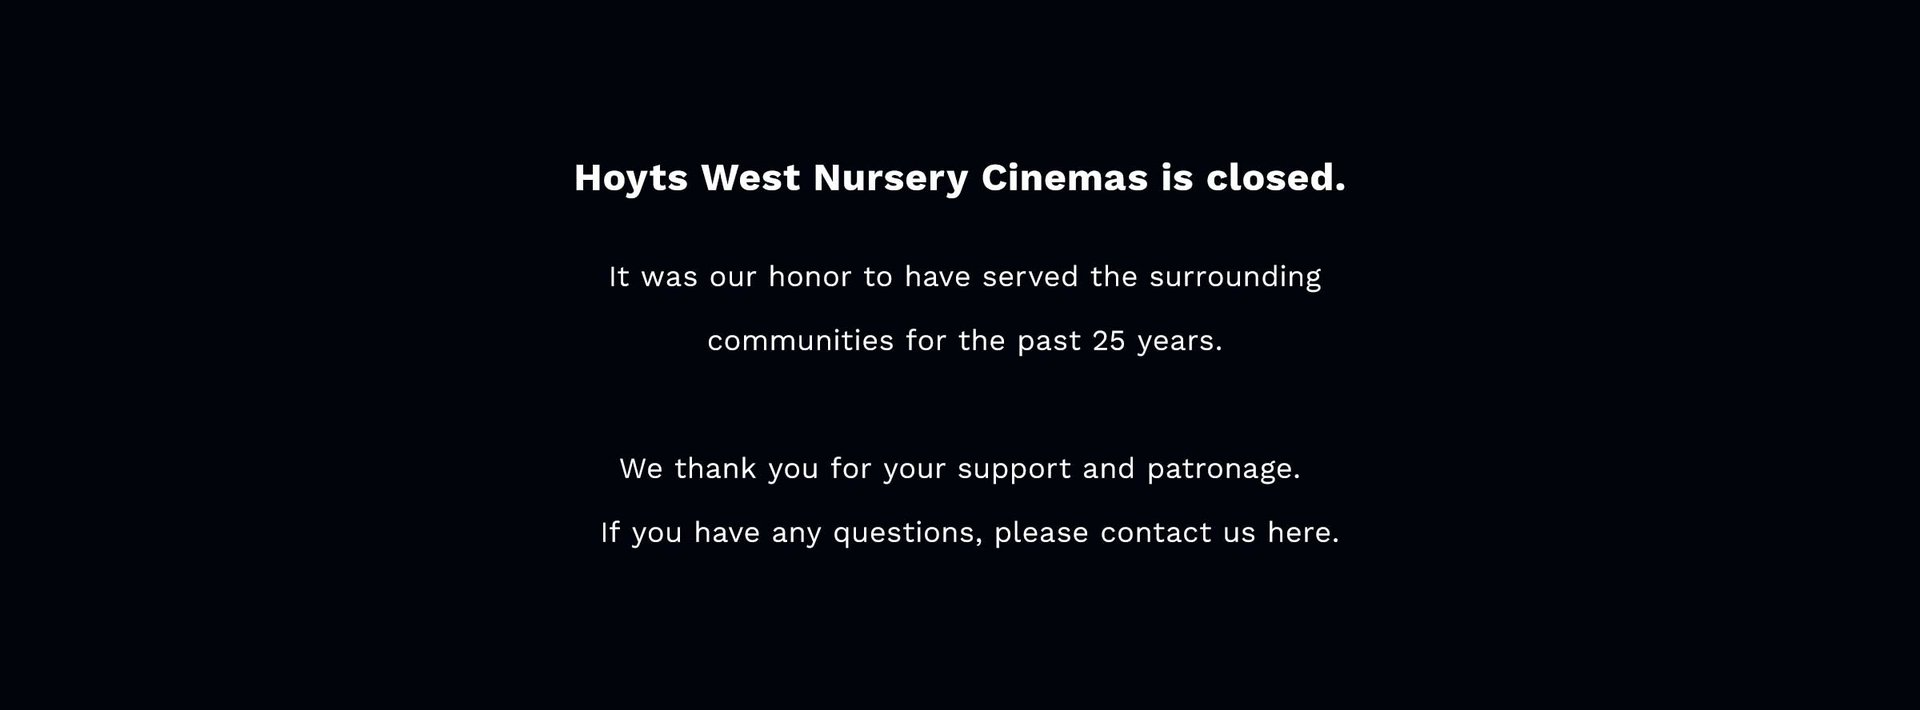 A Message from Hoyts